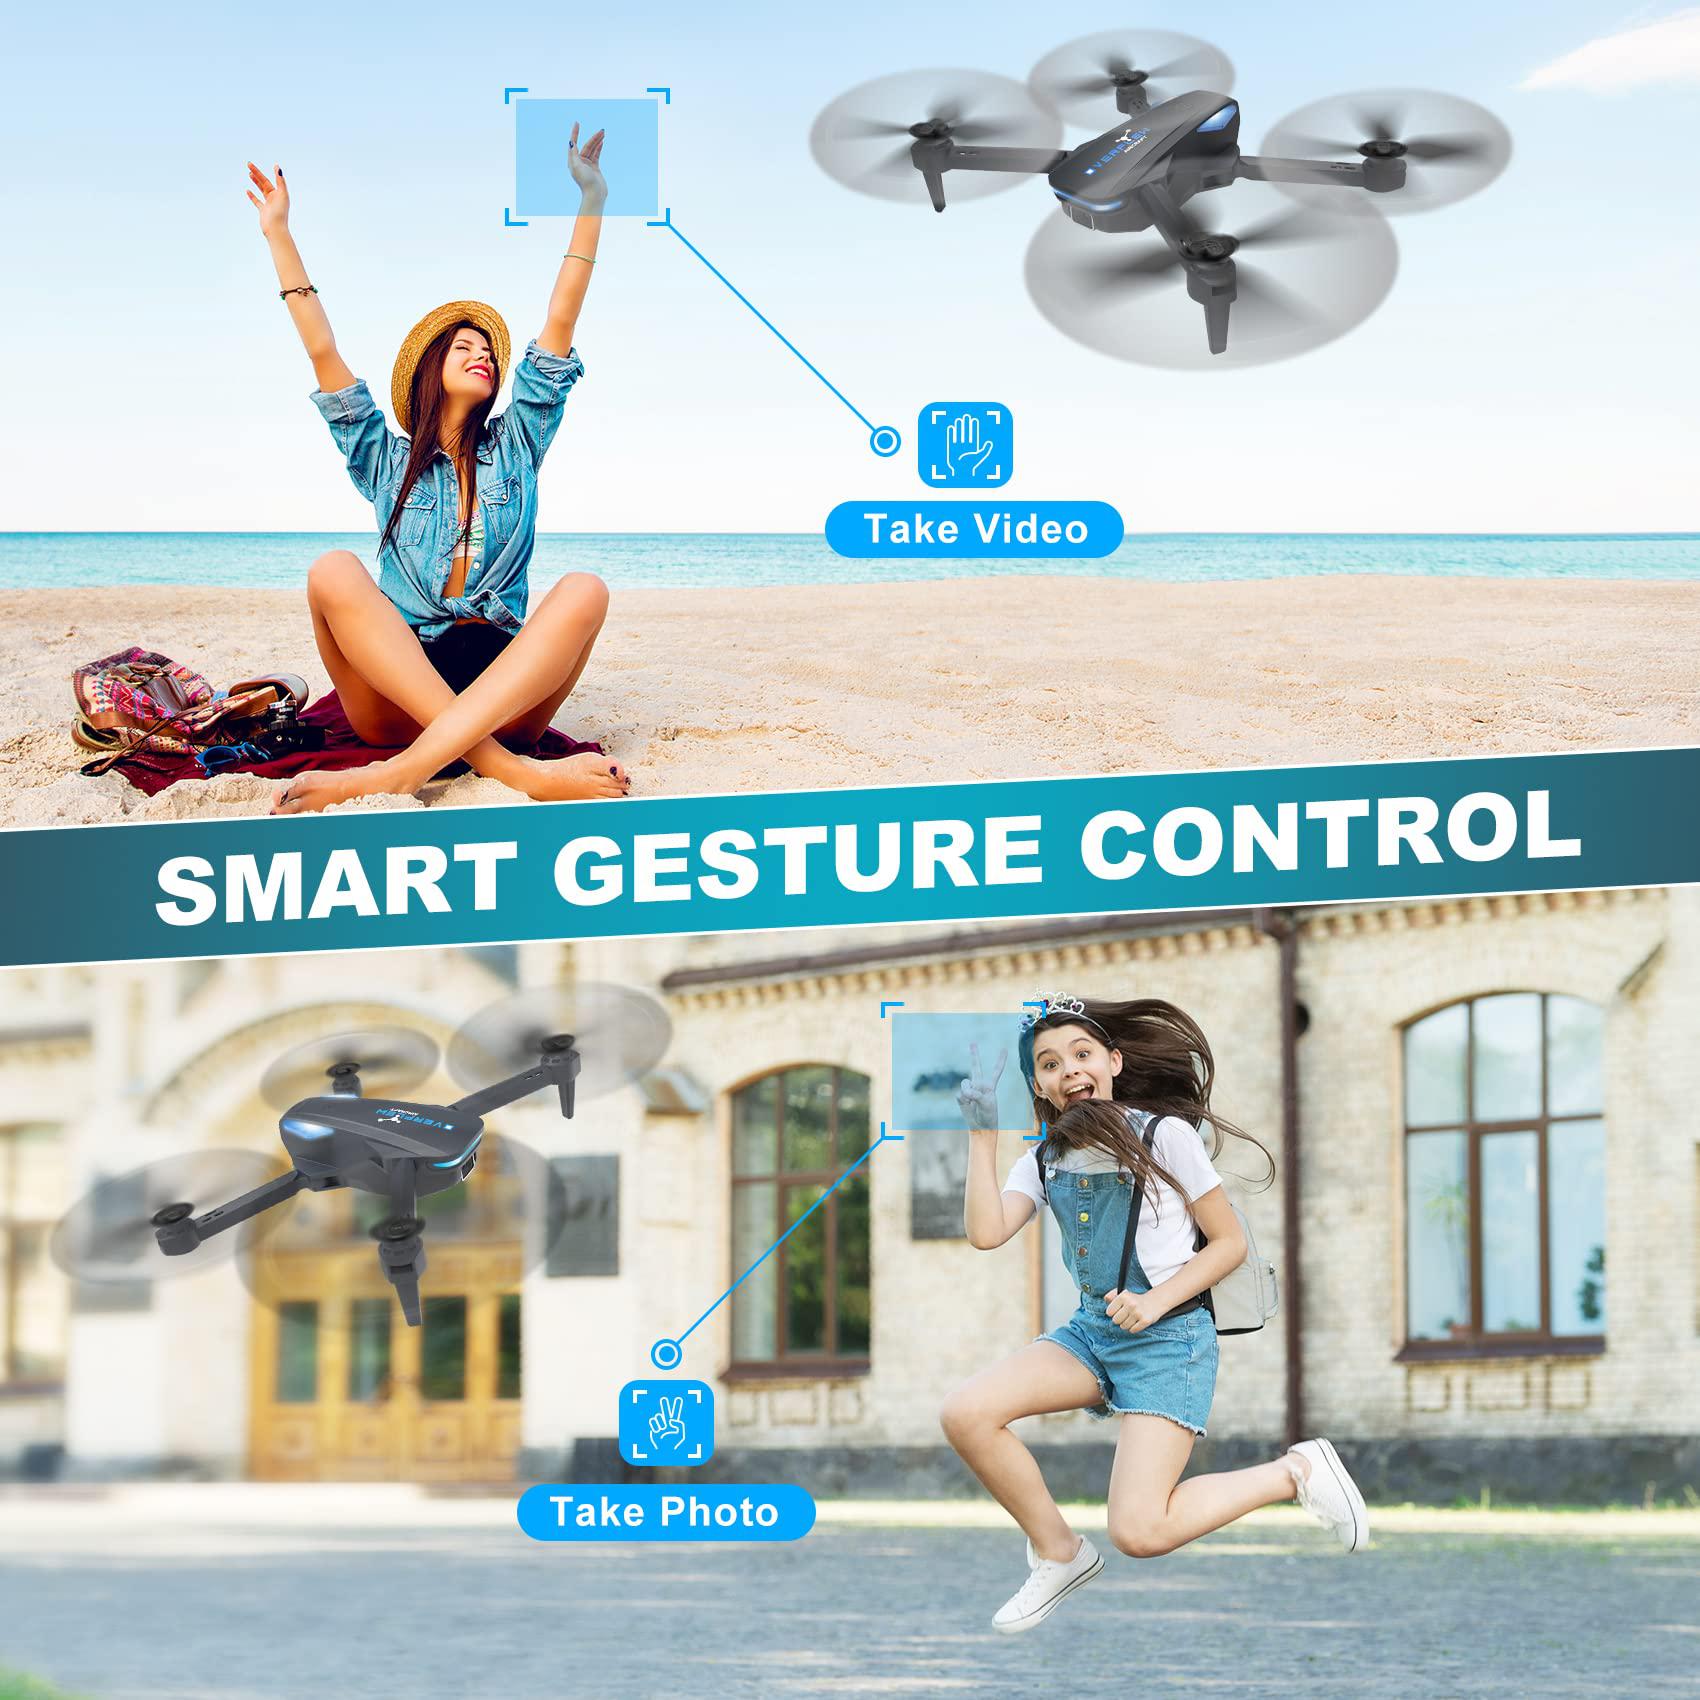 Hiturbo drone with 1080p camera for adults and kids, foldable fpv remote control quadcopter with voice control, gestures selfie, alti